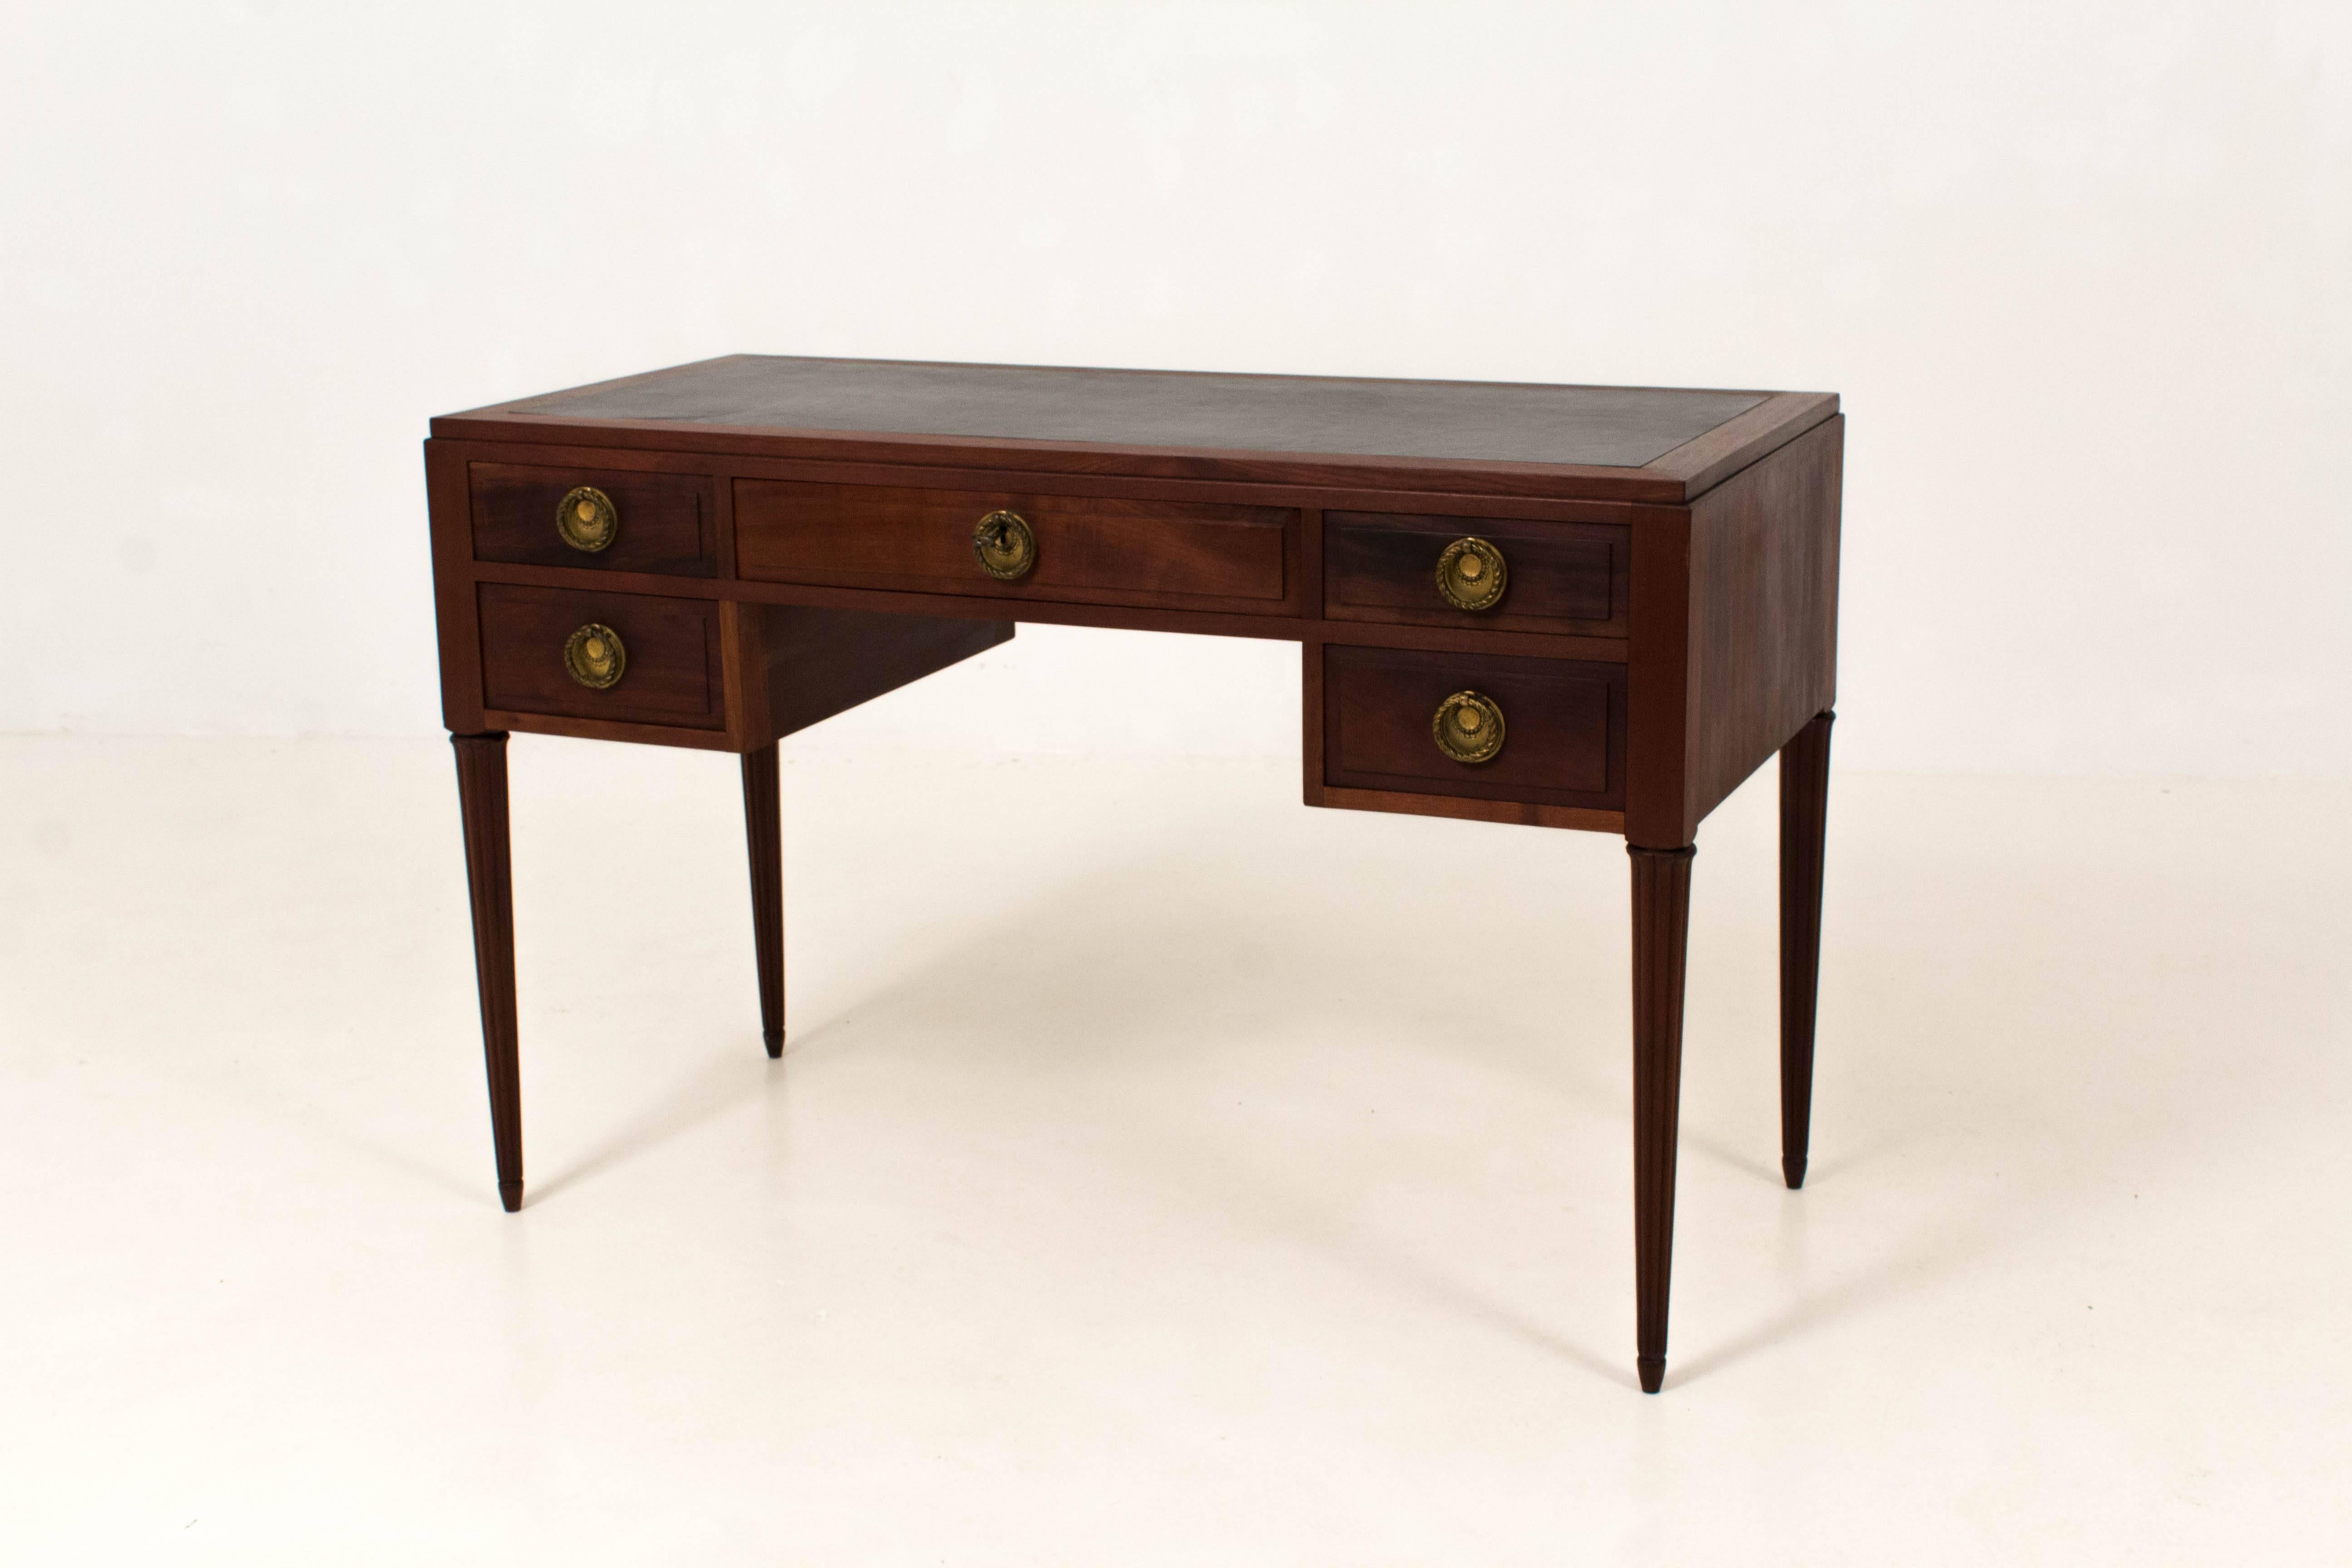 Stunning Art Deco ladies desk with black leather top.
Solid mahogany with original brass handles.
In good original condition with minor wear consistent with age and use,
preserving a beautiful patina.